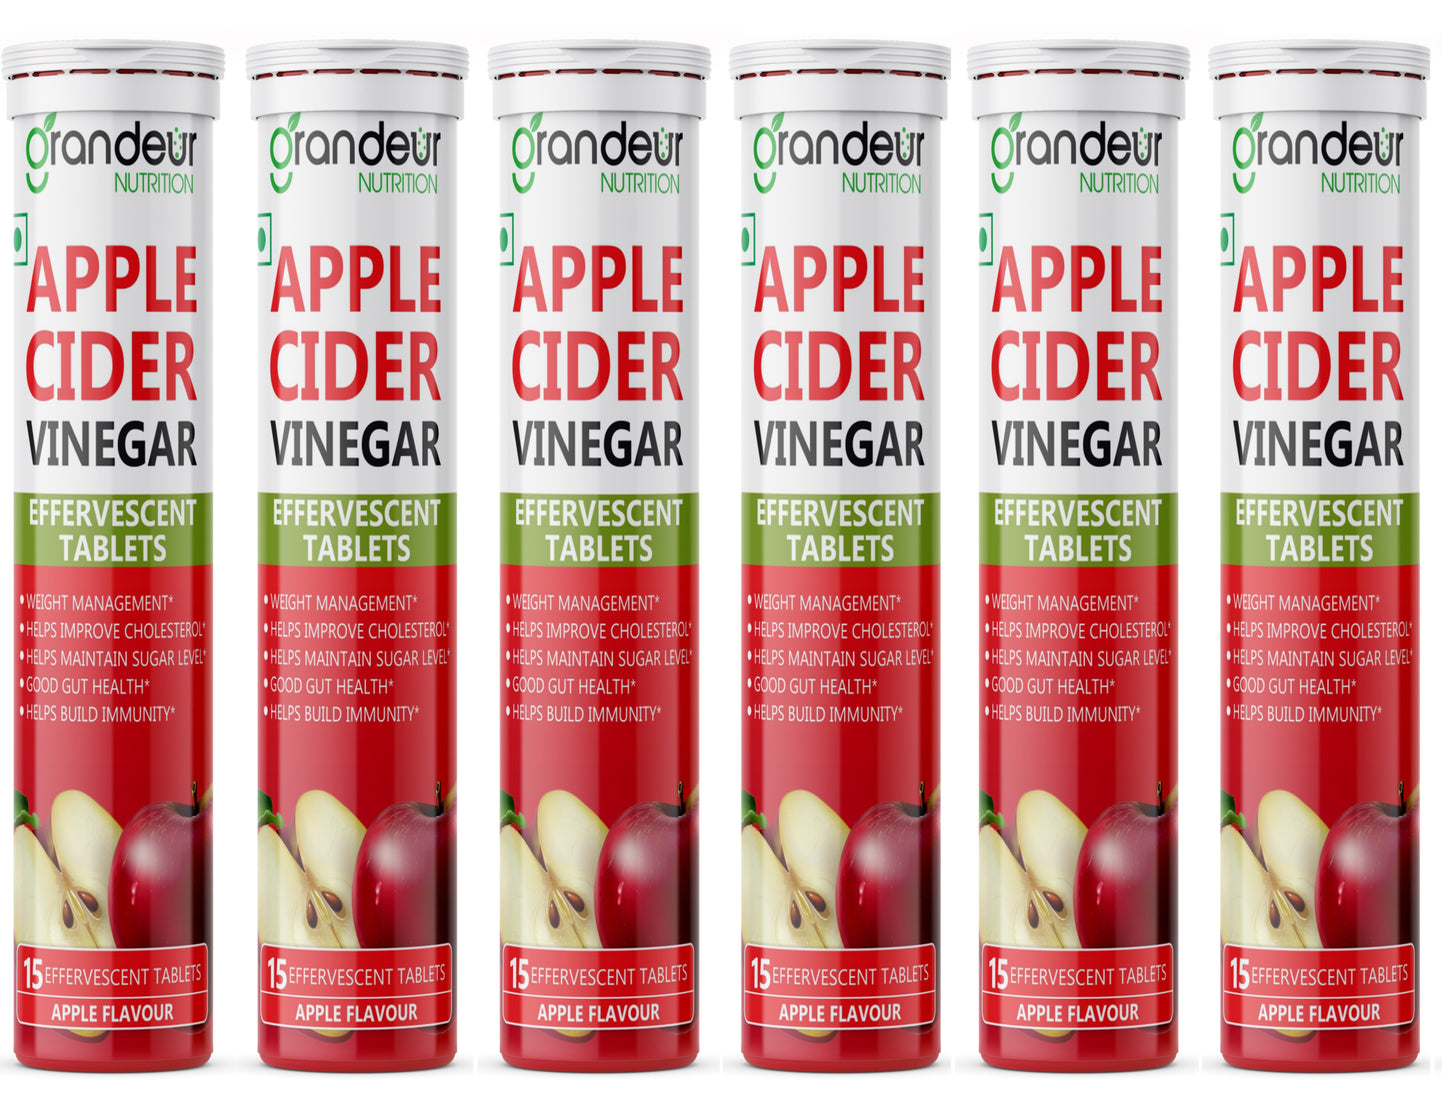 Grandeur (PACK OF 6) Plant Based Apple Cider Vinegar Effervescent Tablets With 500 mg Apple Cider, Pomegranate Extract 100 mg, Vitamin B6, B12 - Sugar Free, For Immunity & Weight Management- 90 Tabs